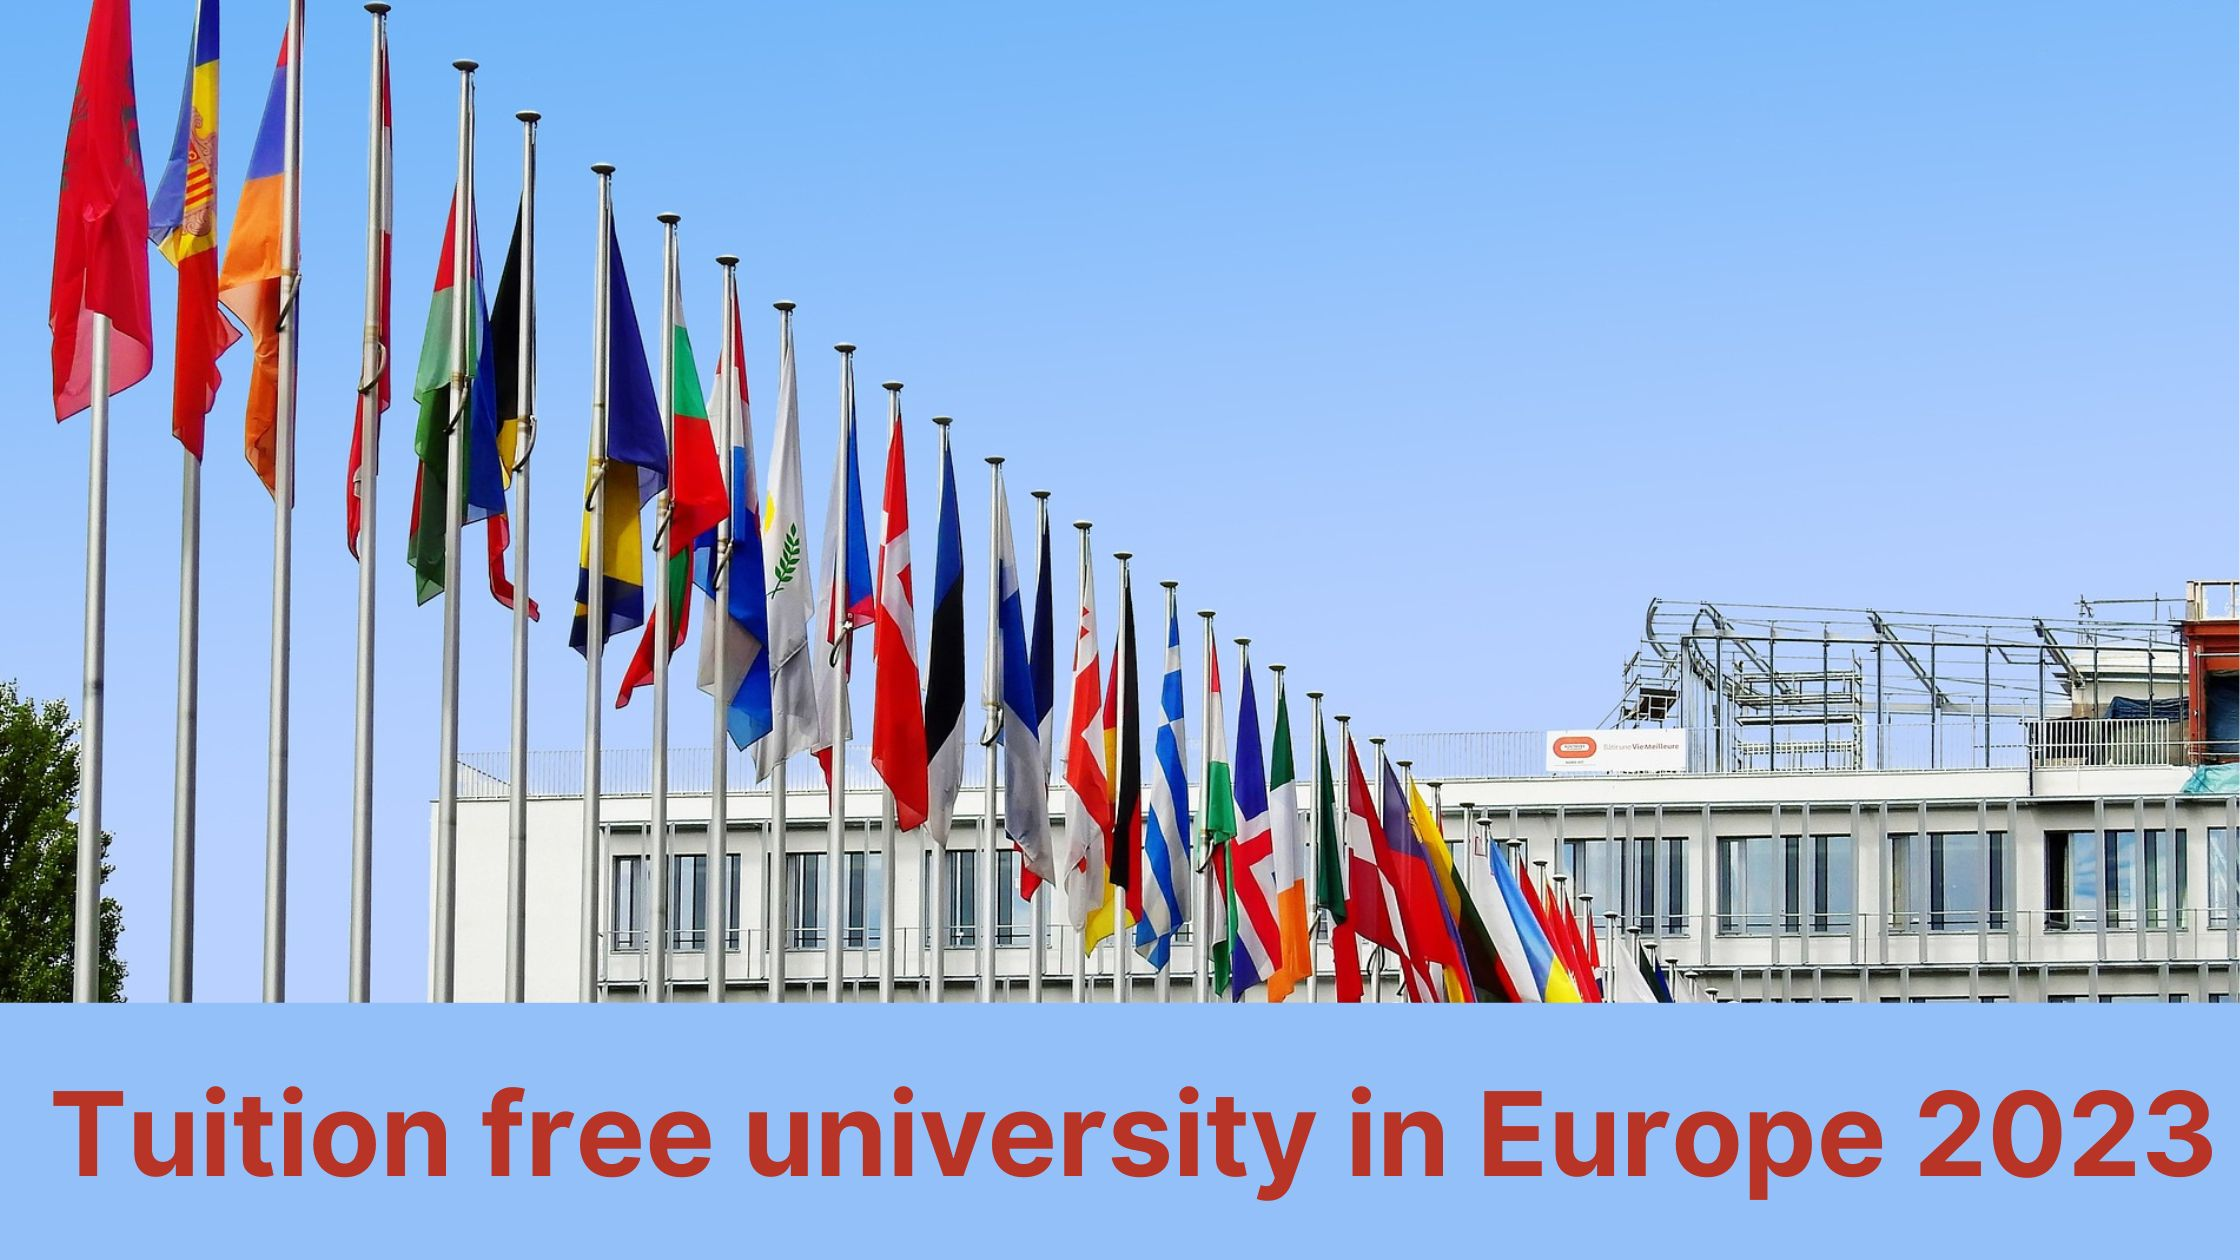 Tuition free university in Europe 2023